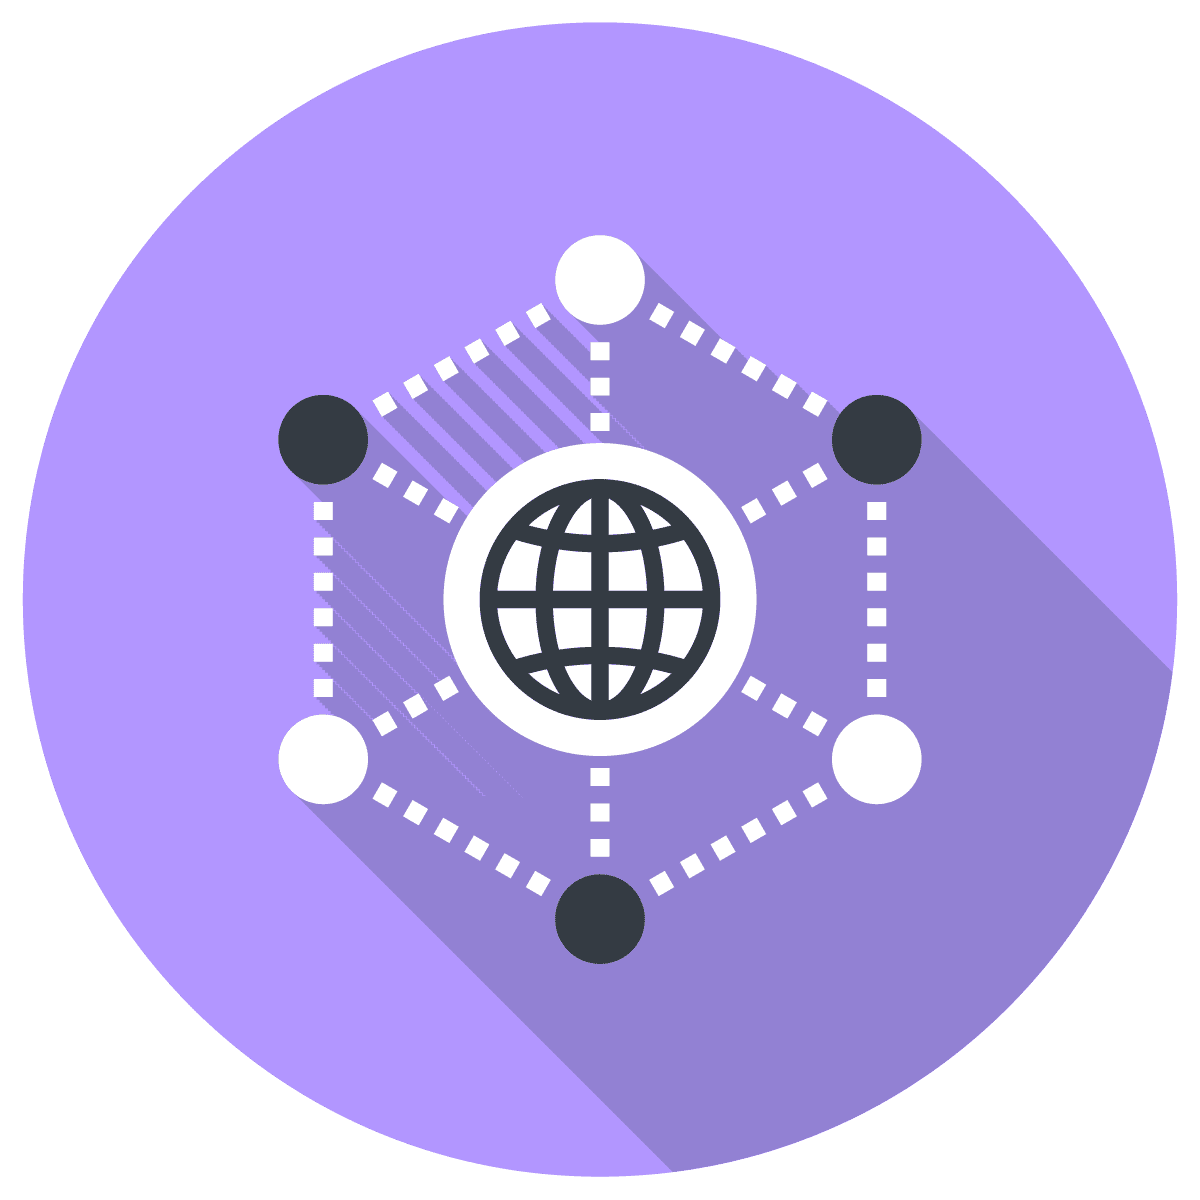 A purple circle with an icon in the middle that represents the connected web.